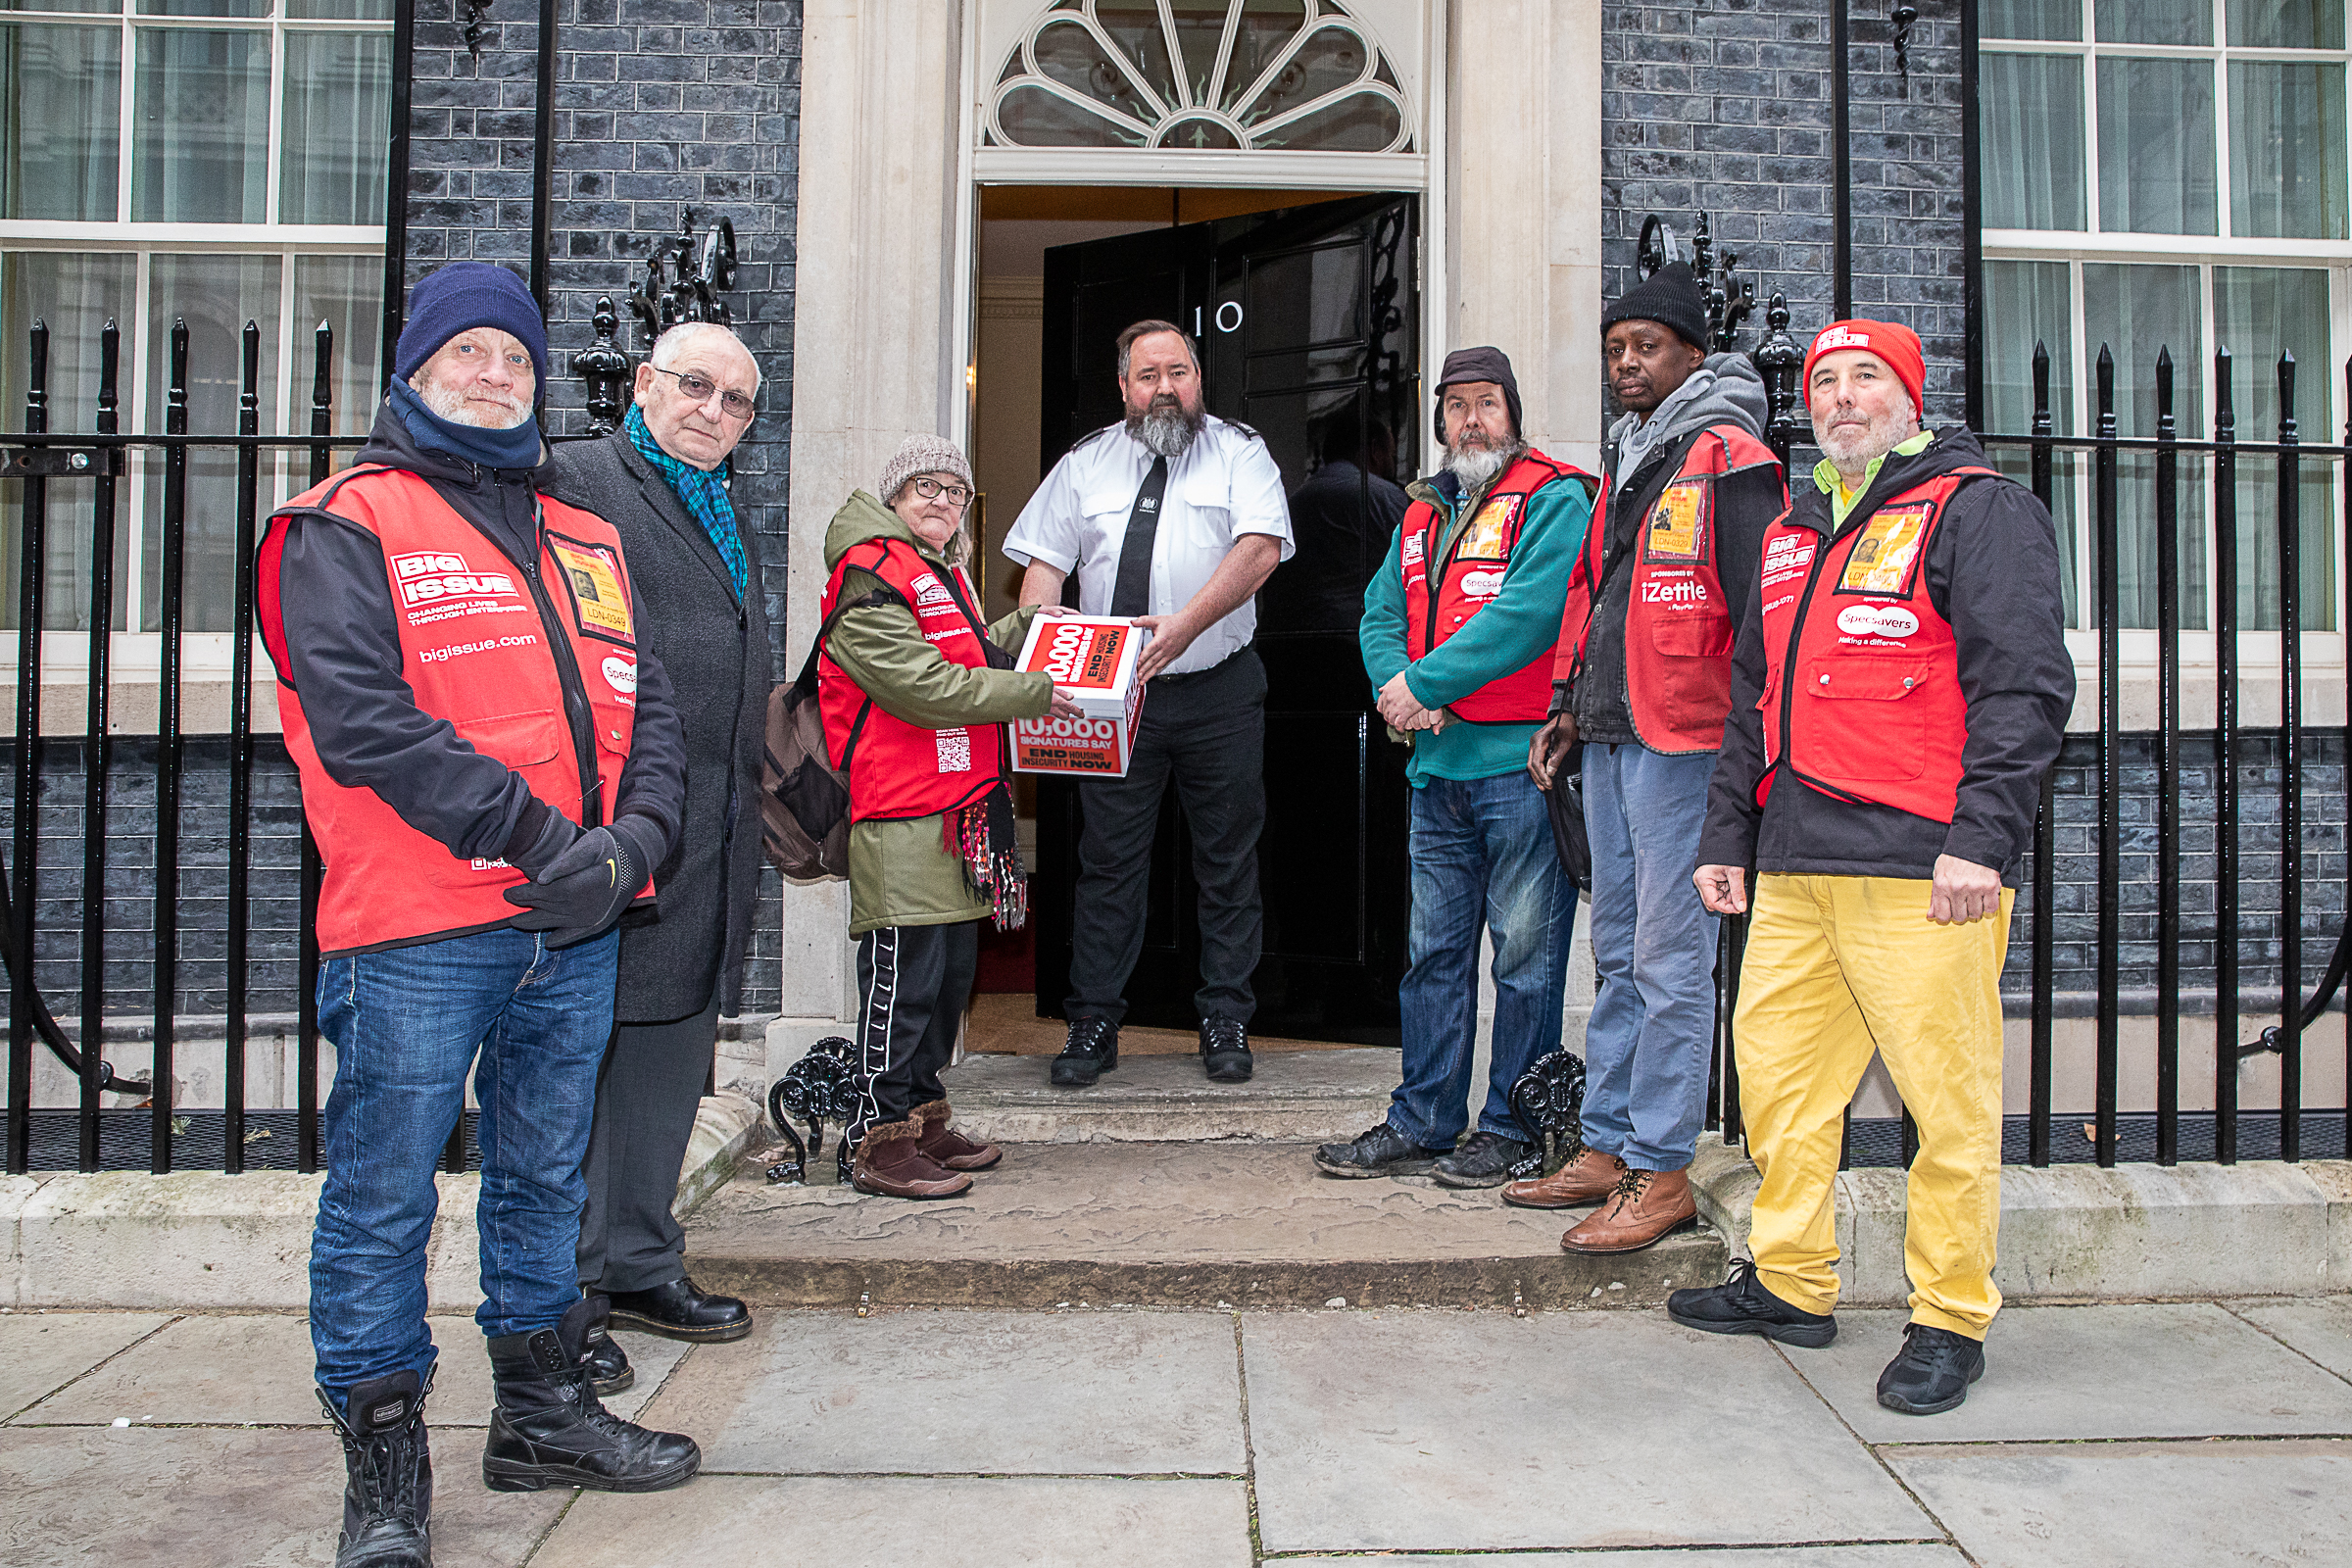 A group of Big Issue vendors at 10 Downing Street